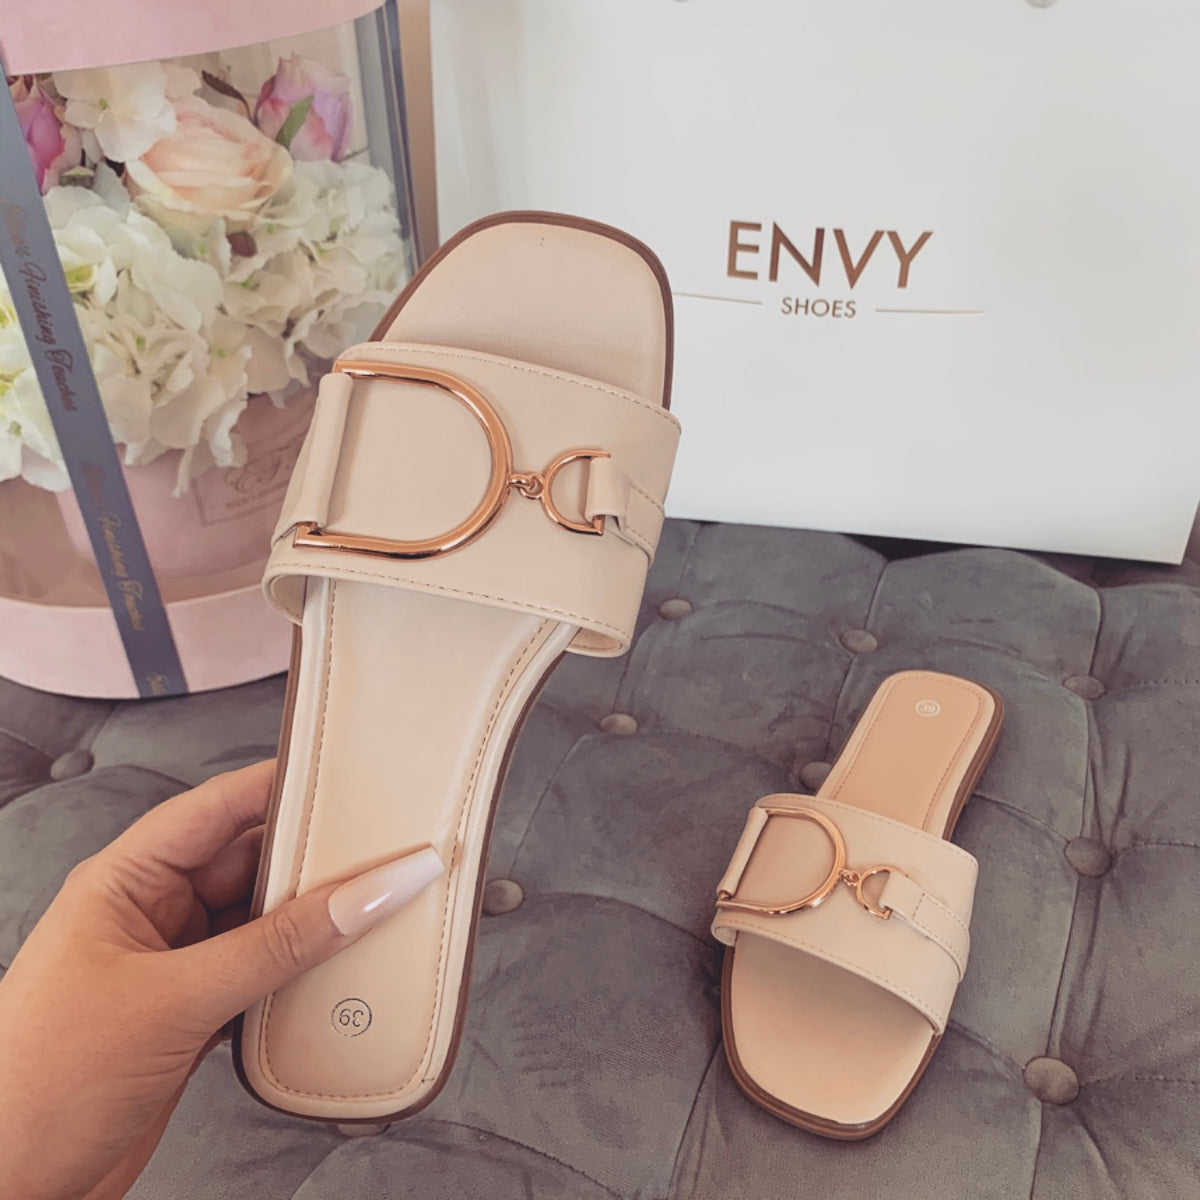 Envy Shoes UK - The slides everyone needs 😍 The Didi nude